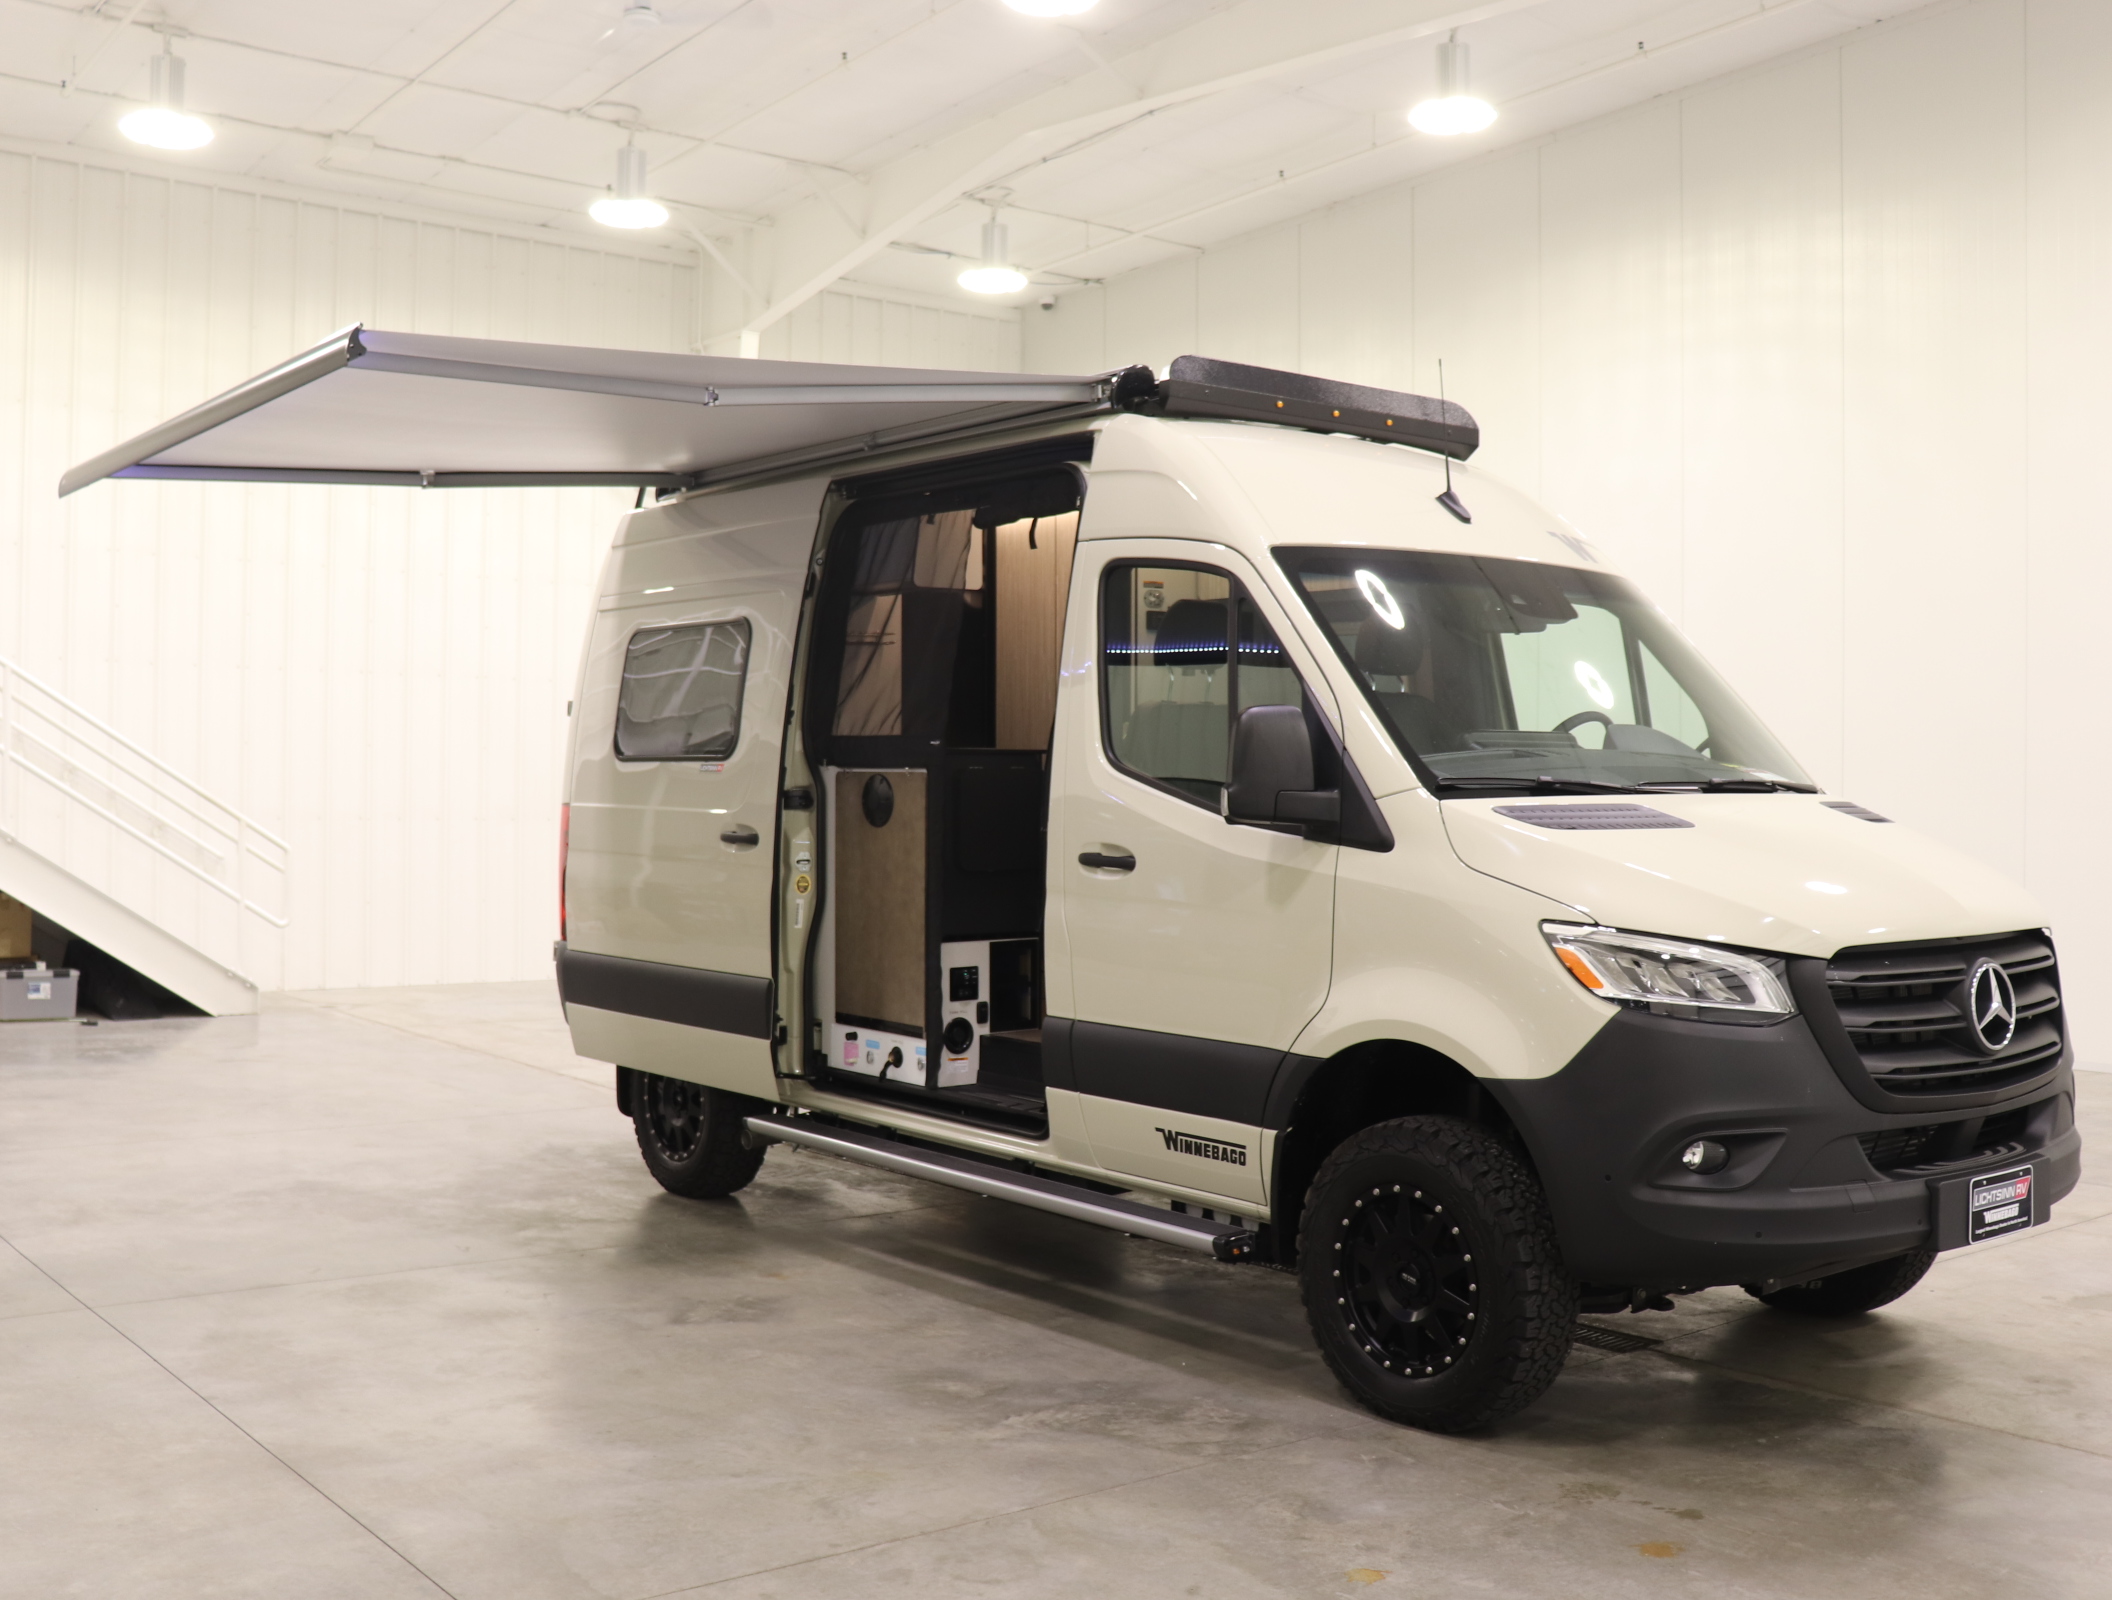 The Winnebago Revel All-in-One Gear Closet and Wet Bath… The Story